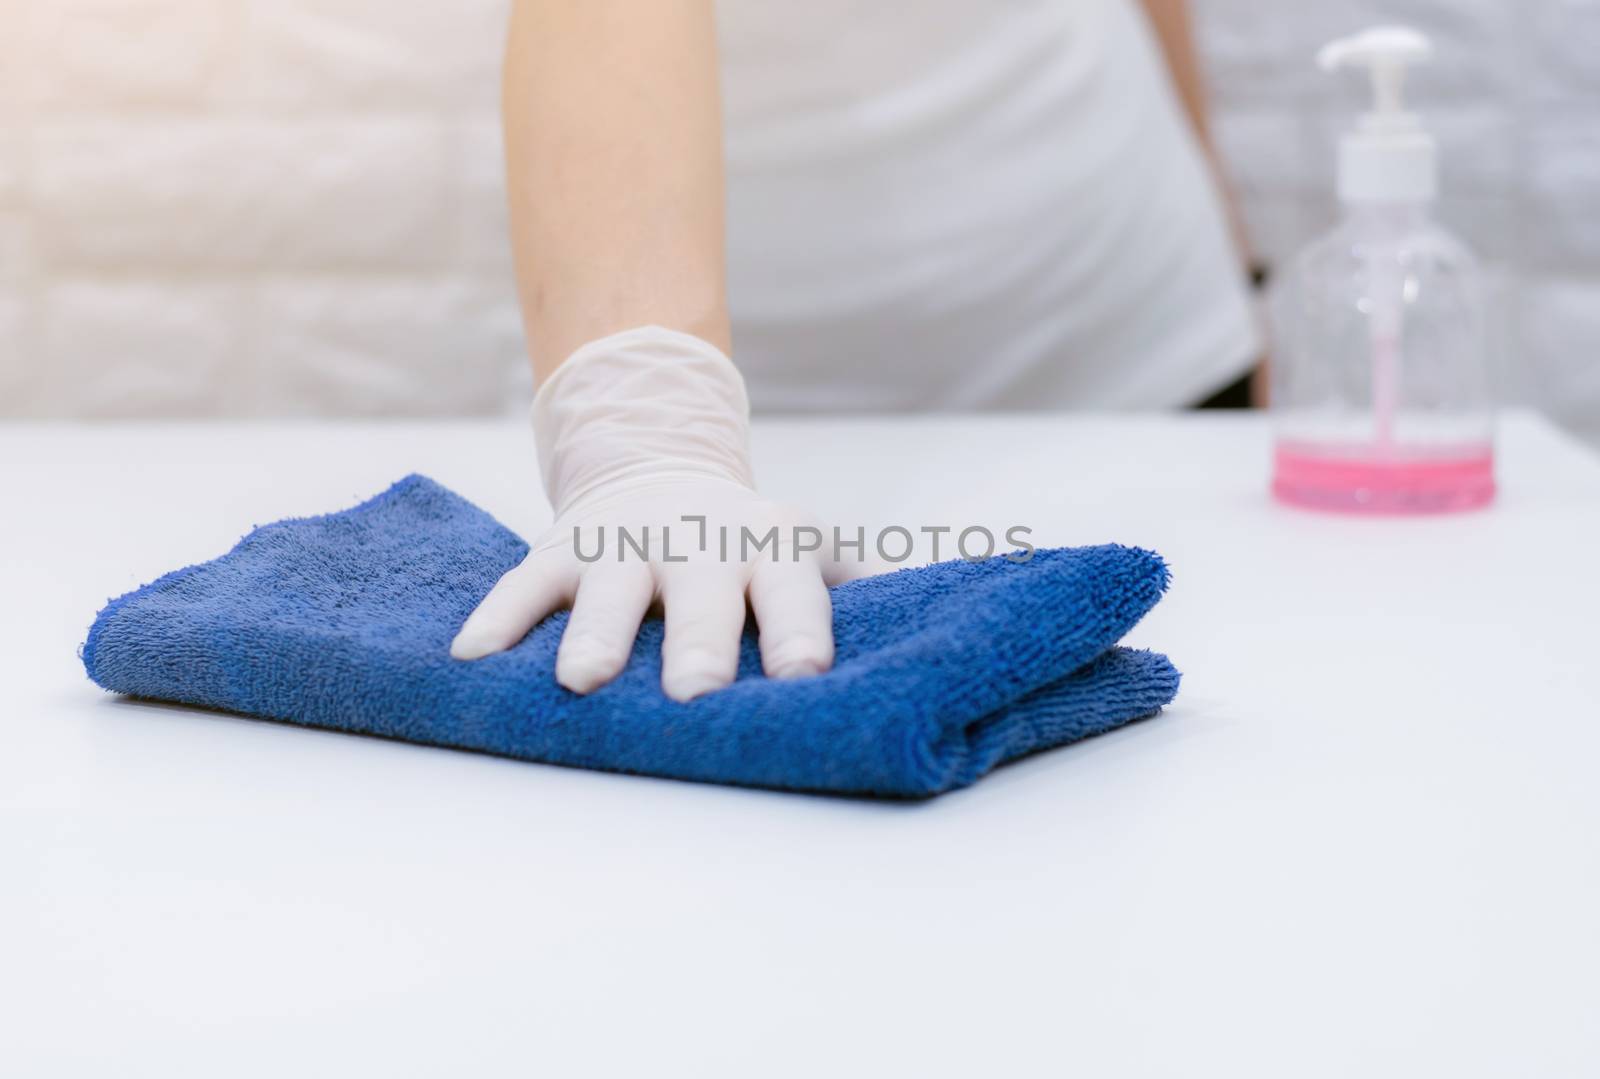 Women wearing gloves to wipe the table to clean the dust